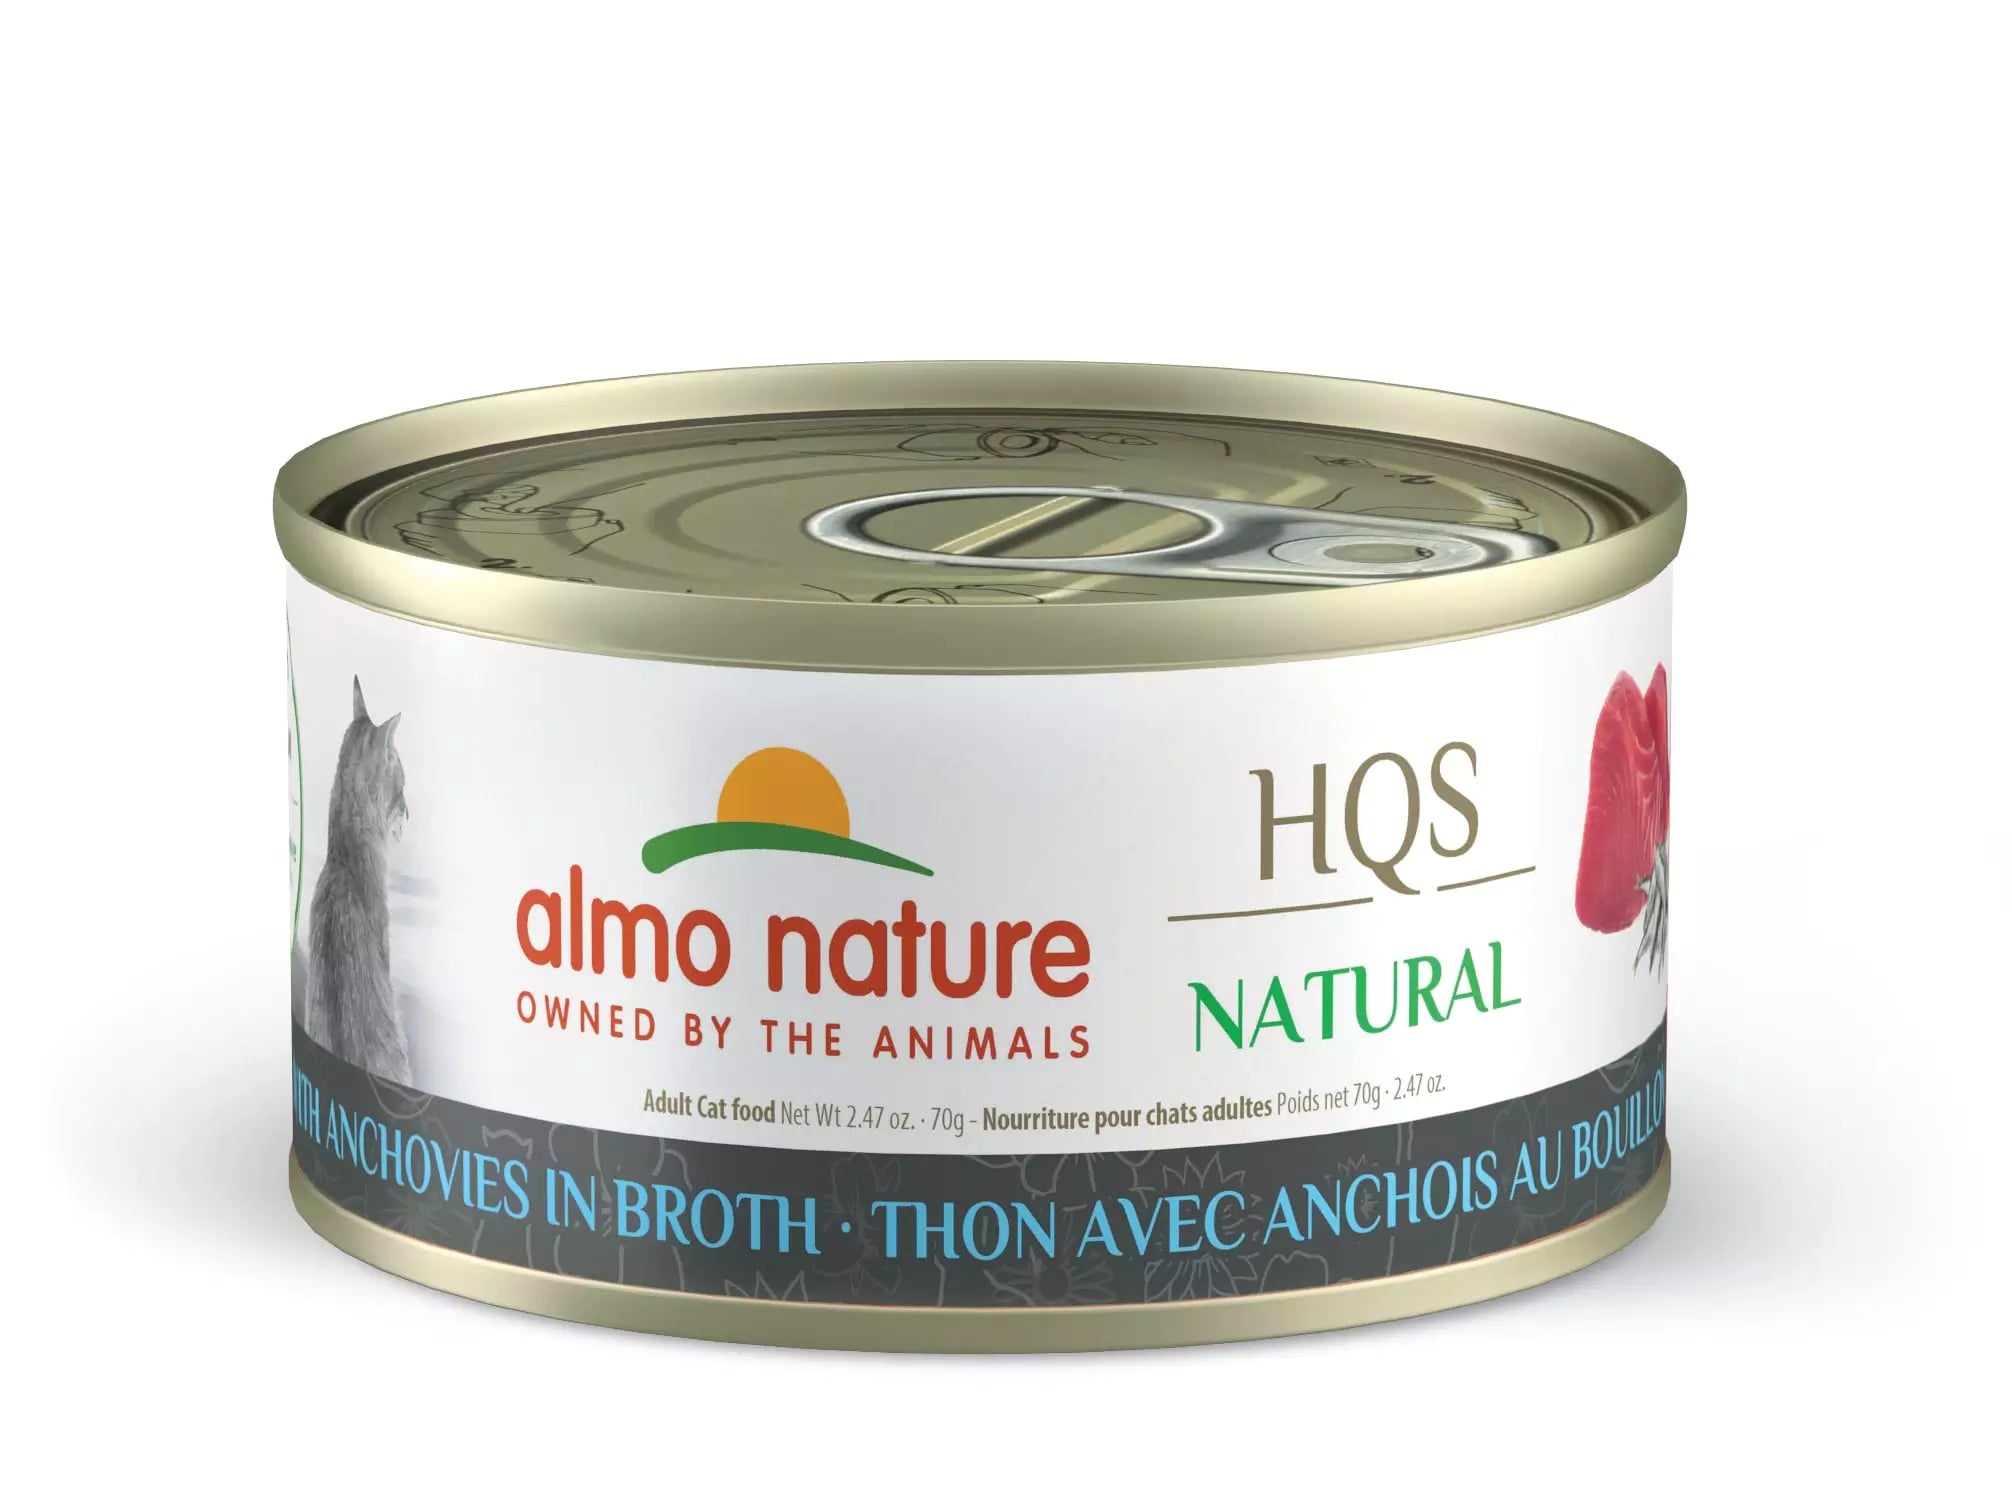 Almo Nature - HQS Natural Tuna with Anchovies in Broth (Wet Cat Food)